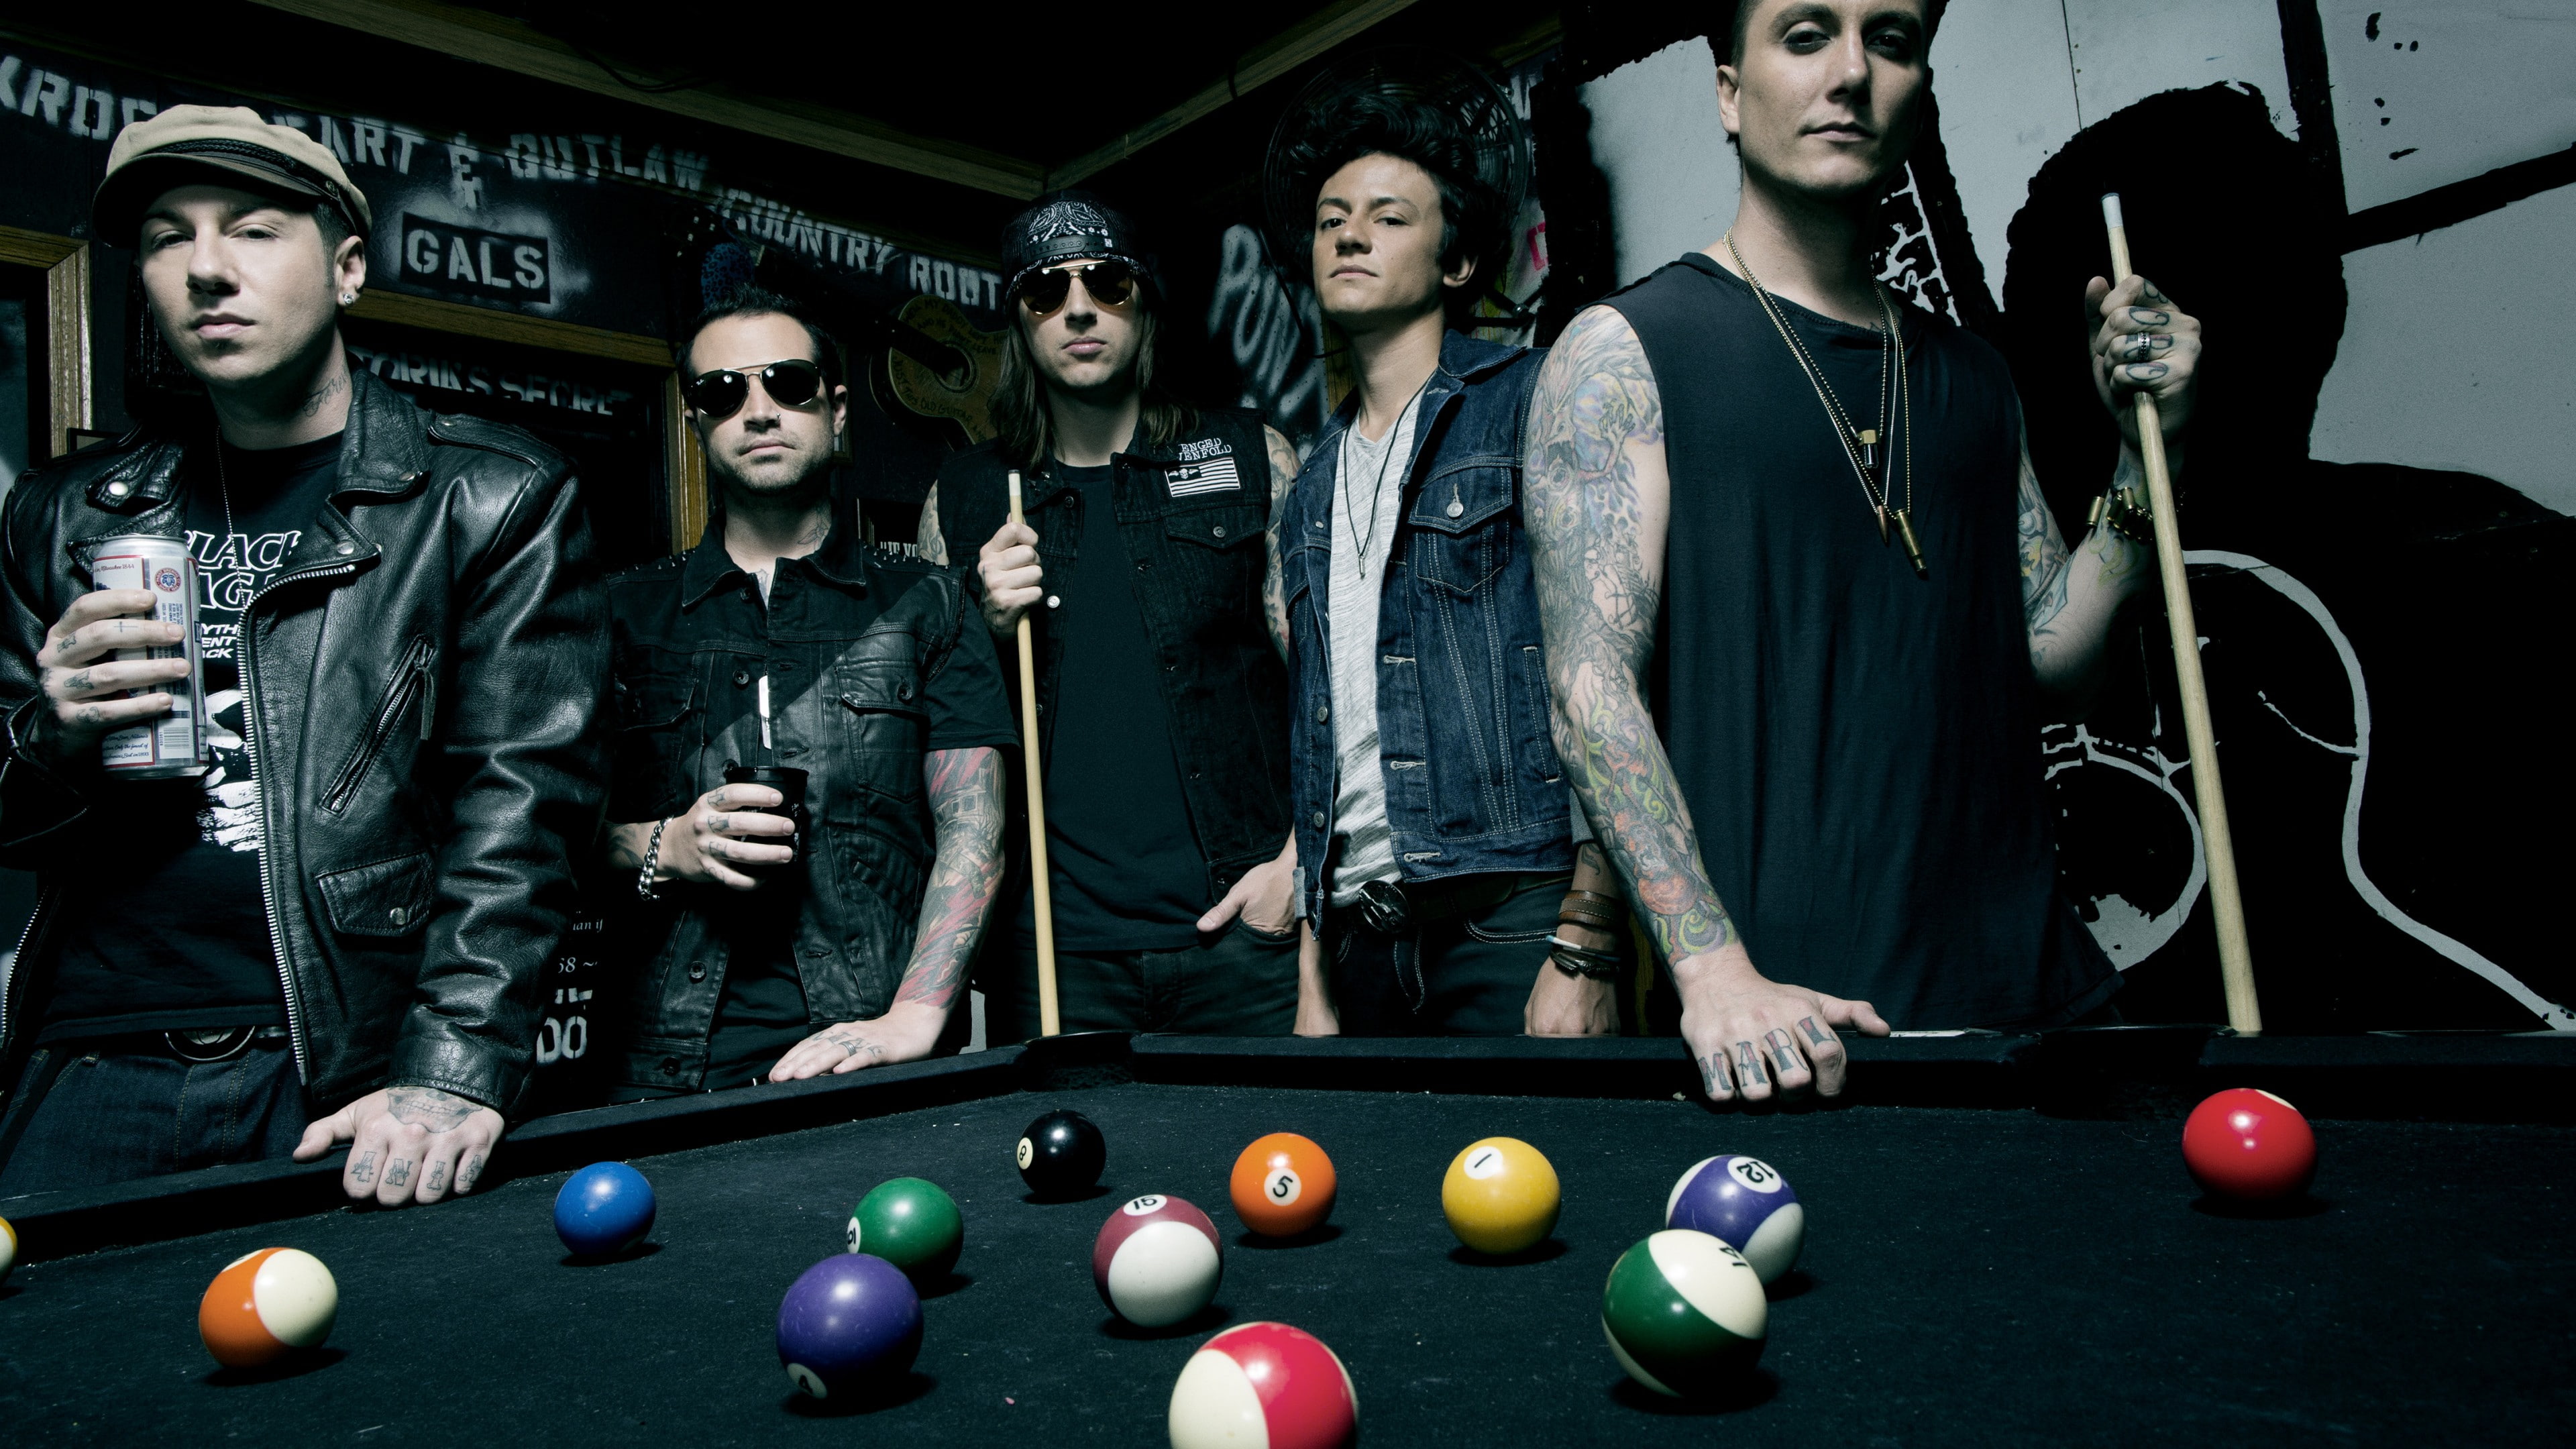 Avenged Sevenfold, Top music artist and bands, M. Shadows, Zacky Vengeance